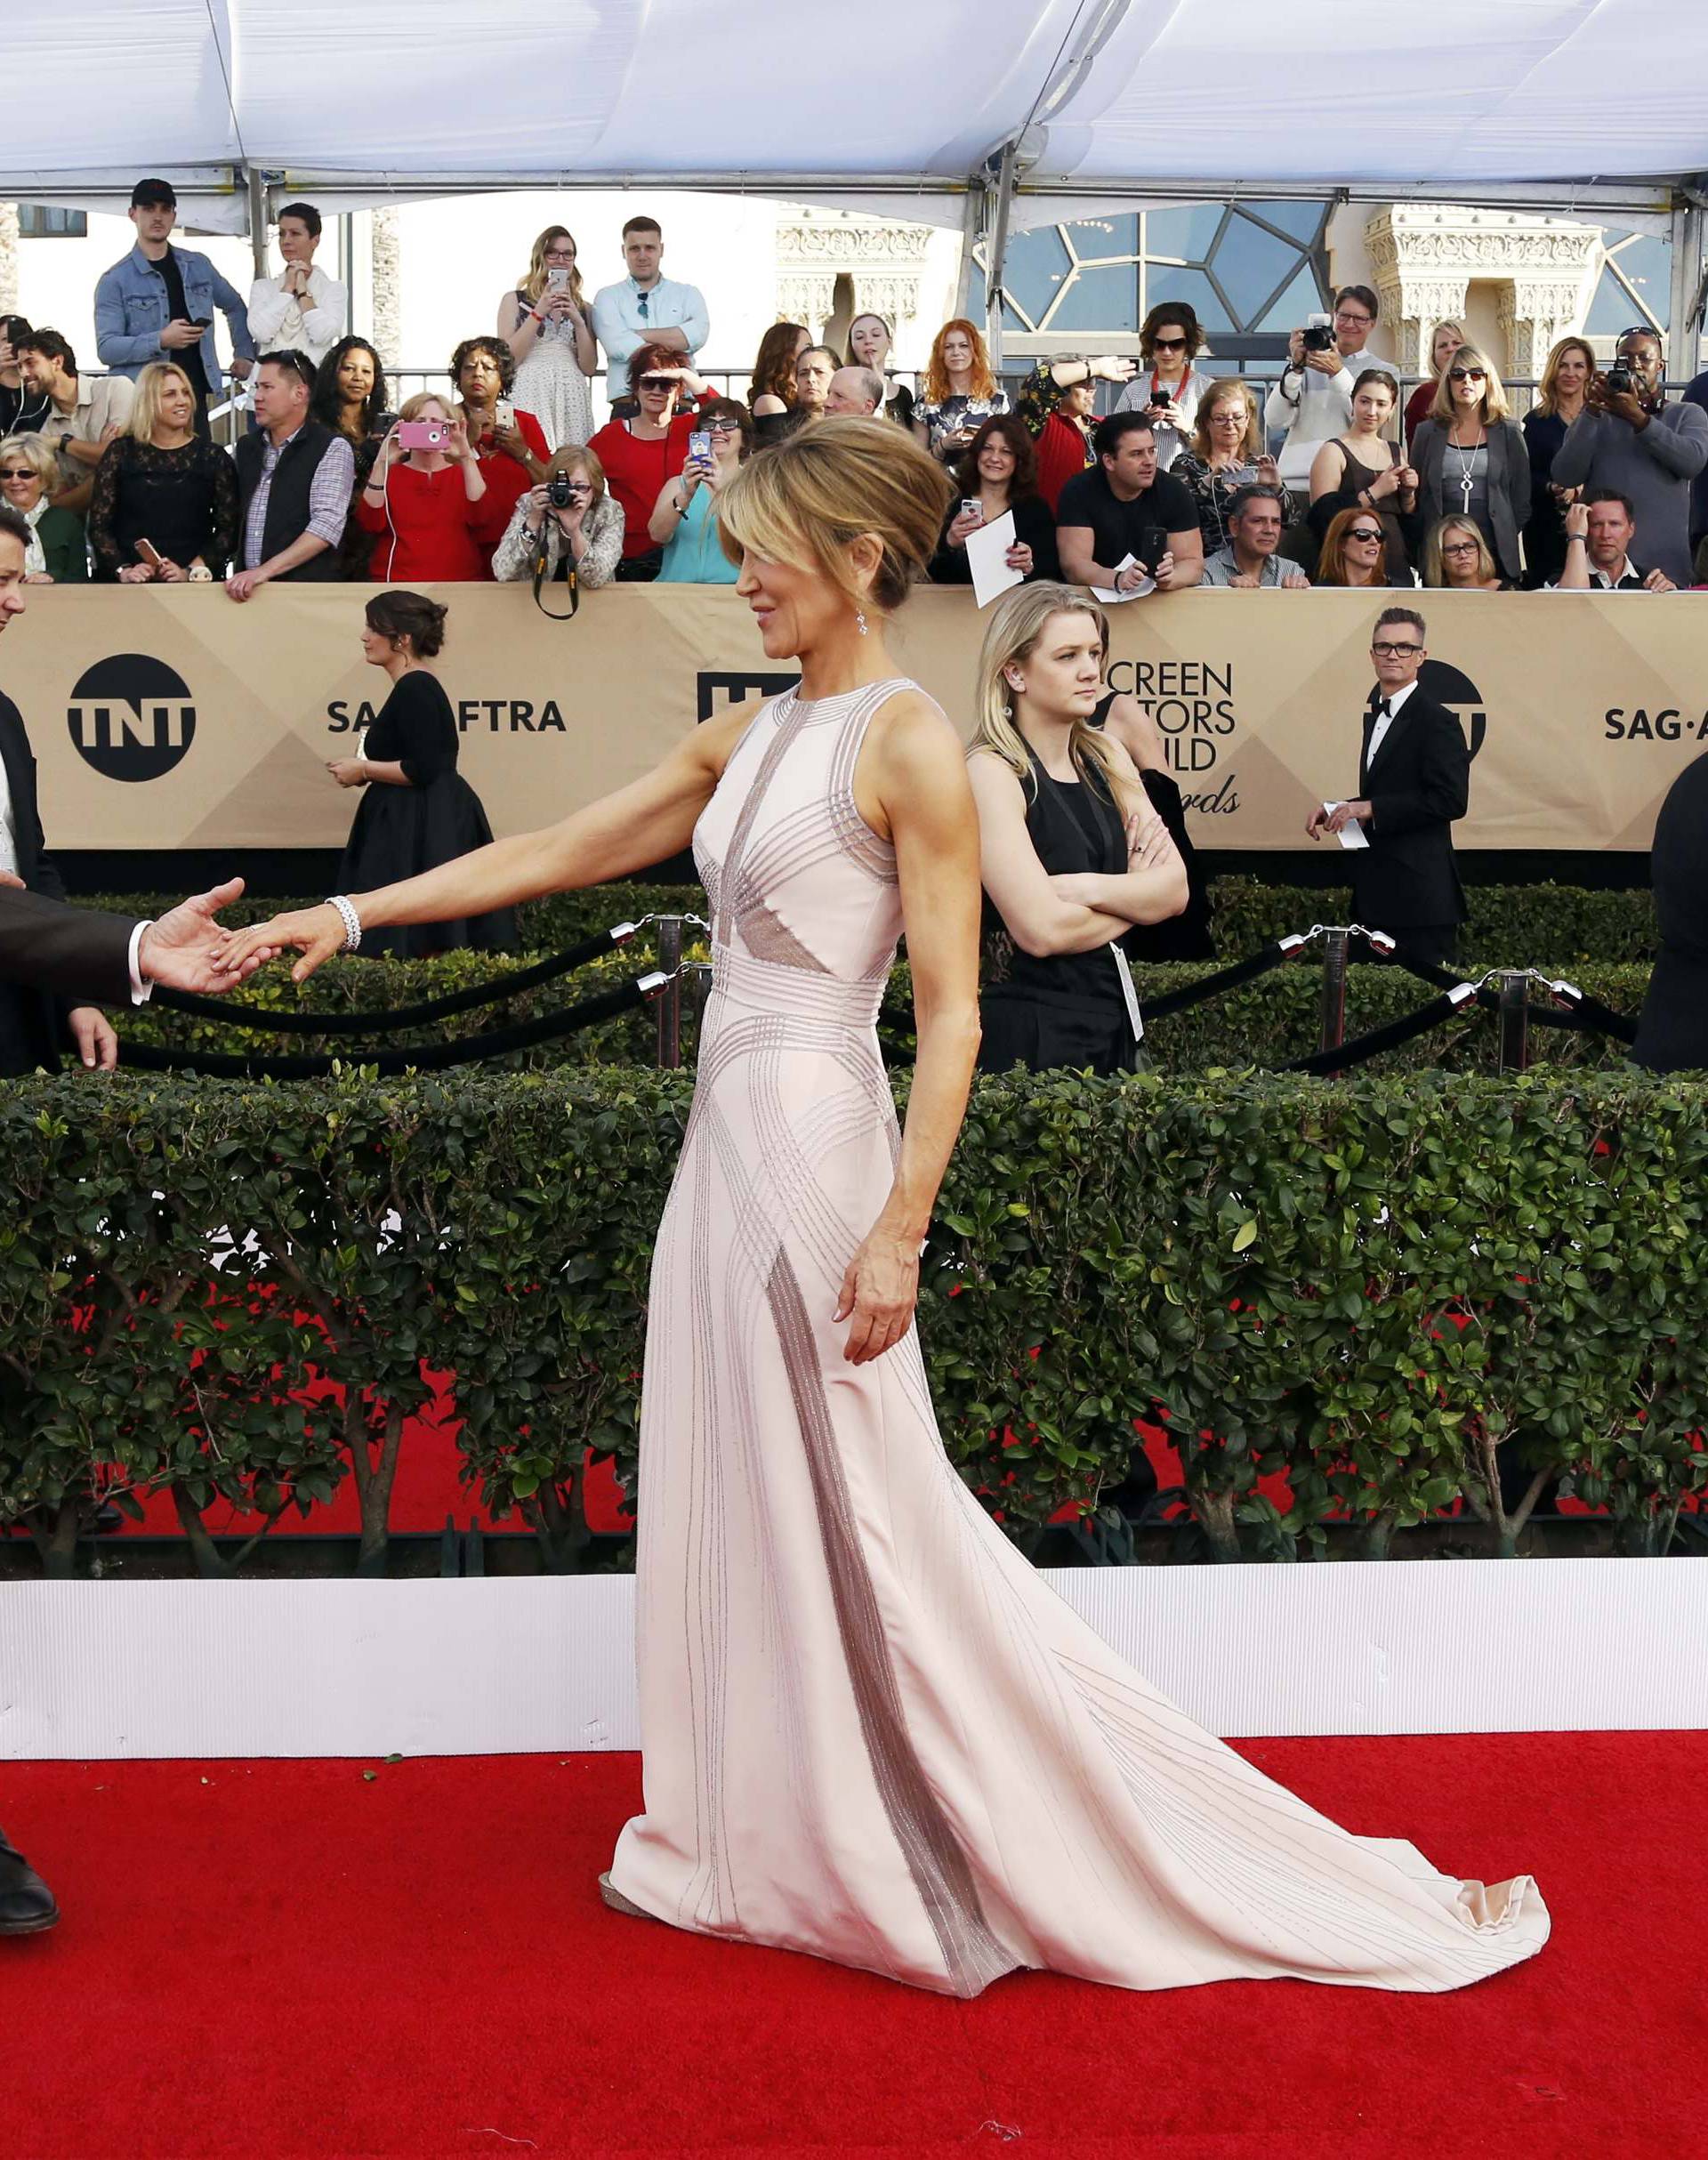 William H. Macy and Felicity Huffman arrive at the 23rd Screen Actors Guild Awards in Los Angeles